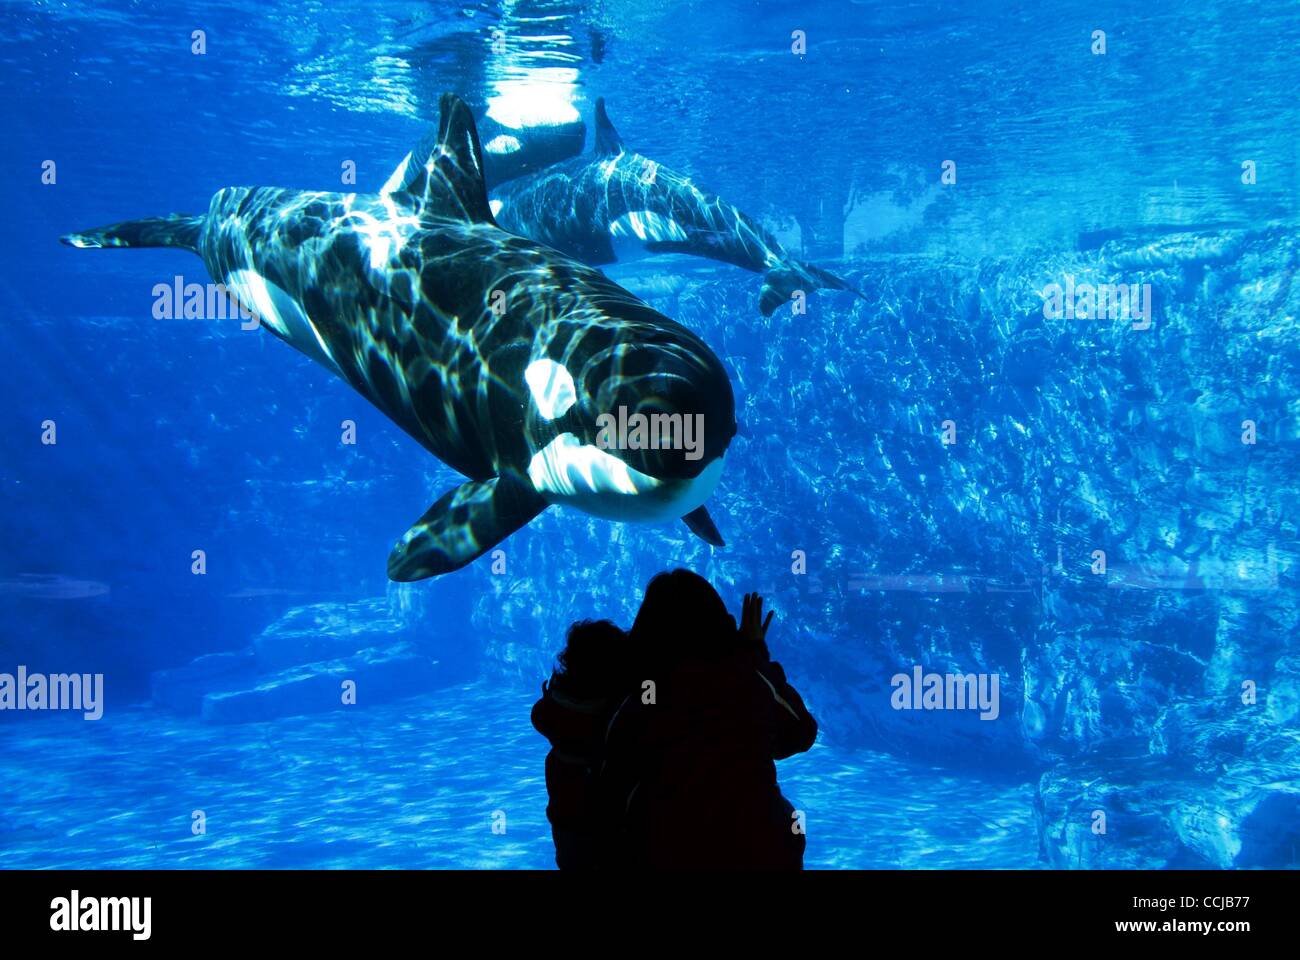 Dec 15, 2010 - Orlando, Florida, USA - Visitors at the Shamu exhibit at Sea World Orlando interacting with a whale. After the tragic death of a whale trainer in February 2010, Sea World intends to launch an all new killer whale show in Spring 2011 to distance itself from the accident. (Credit Image: Stock Photo